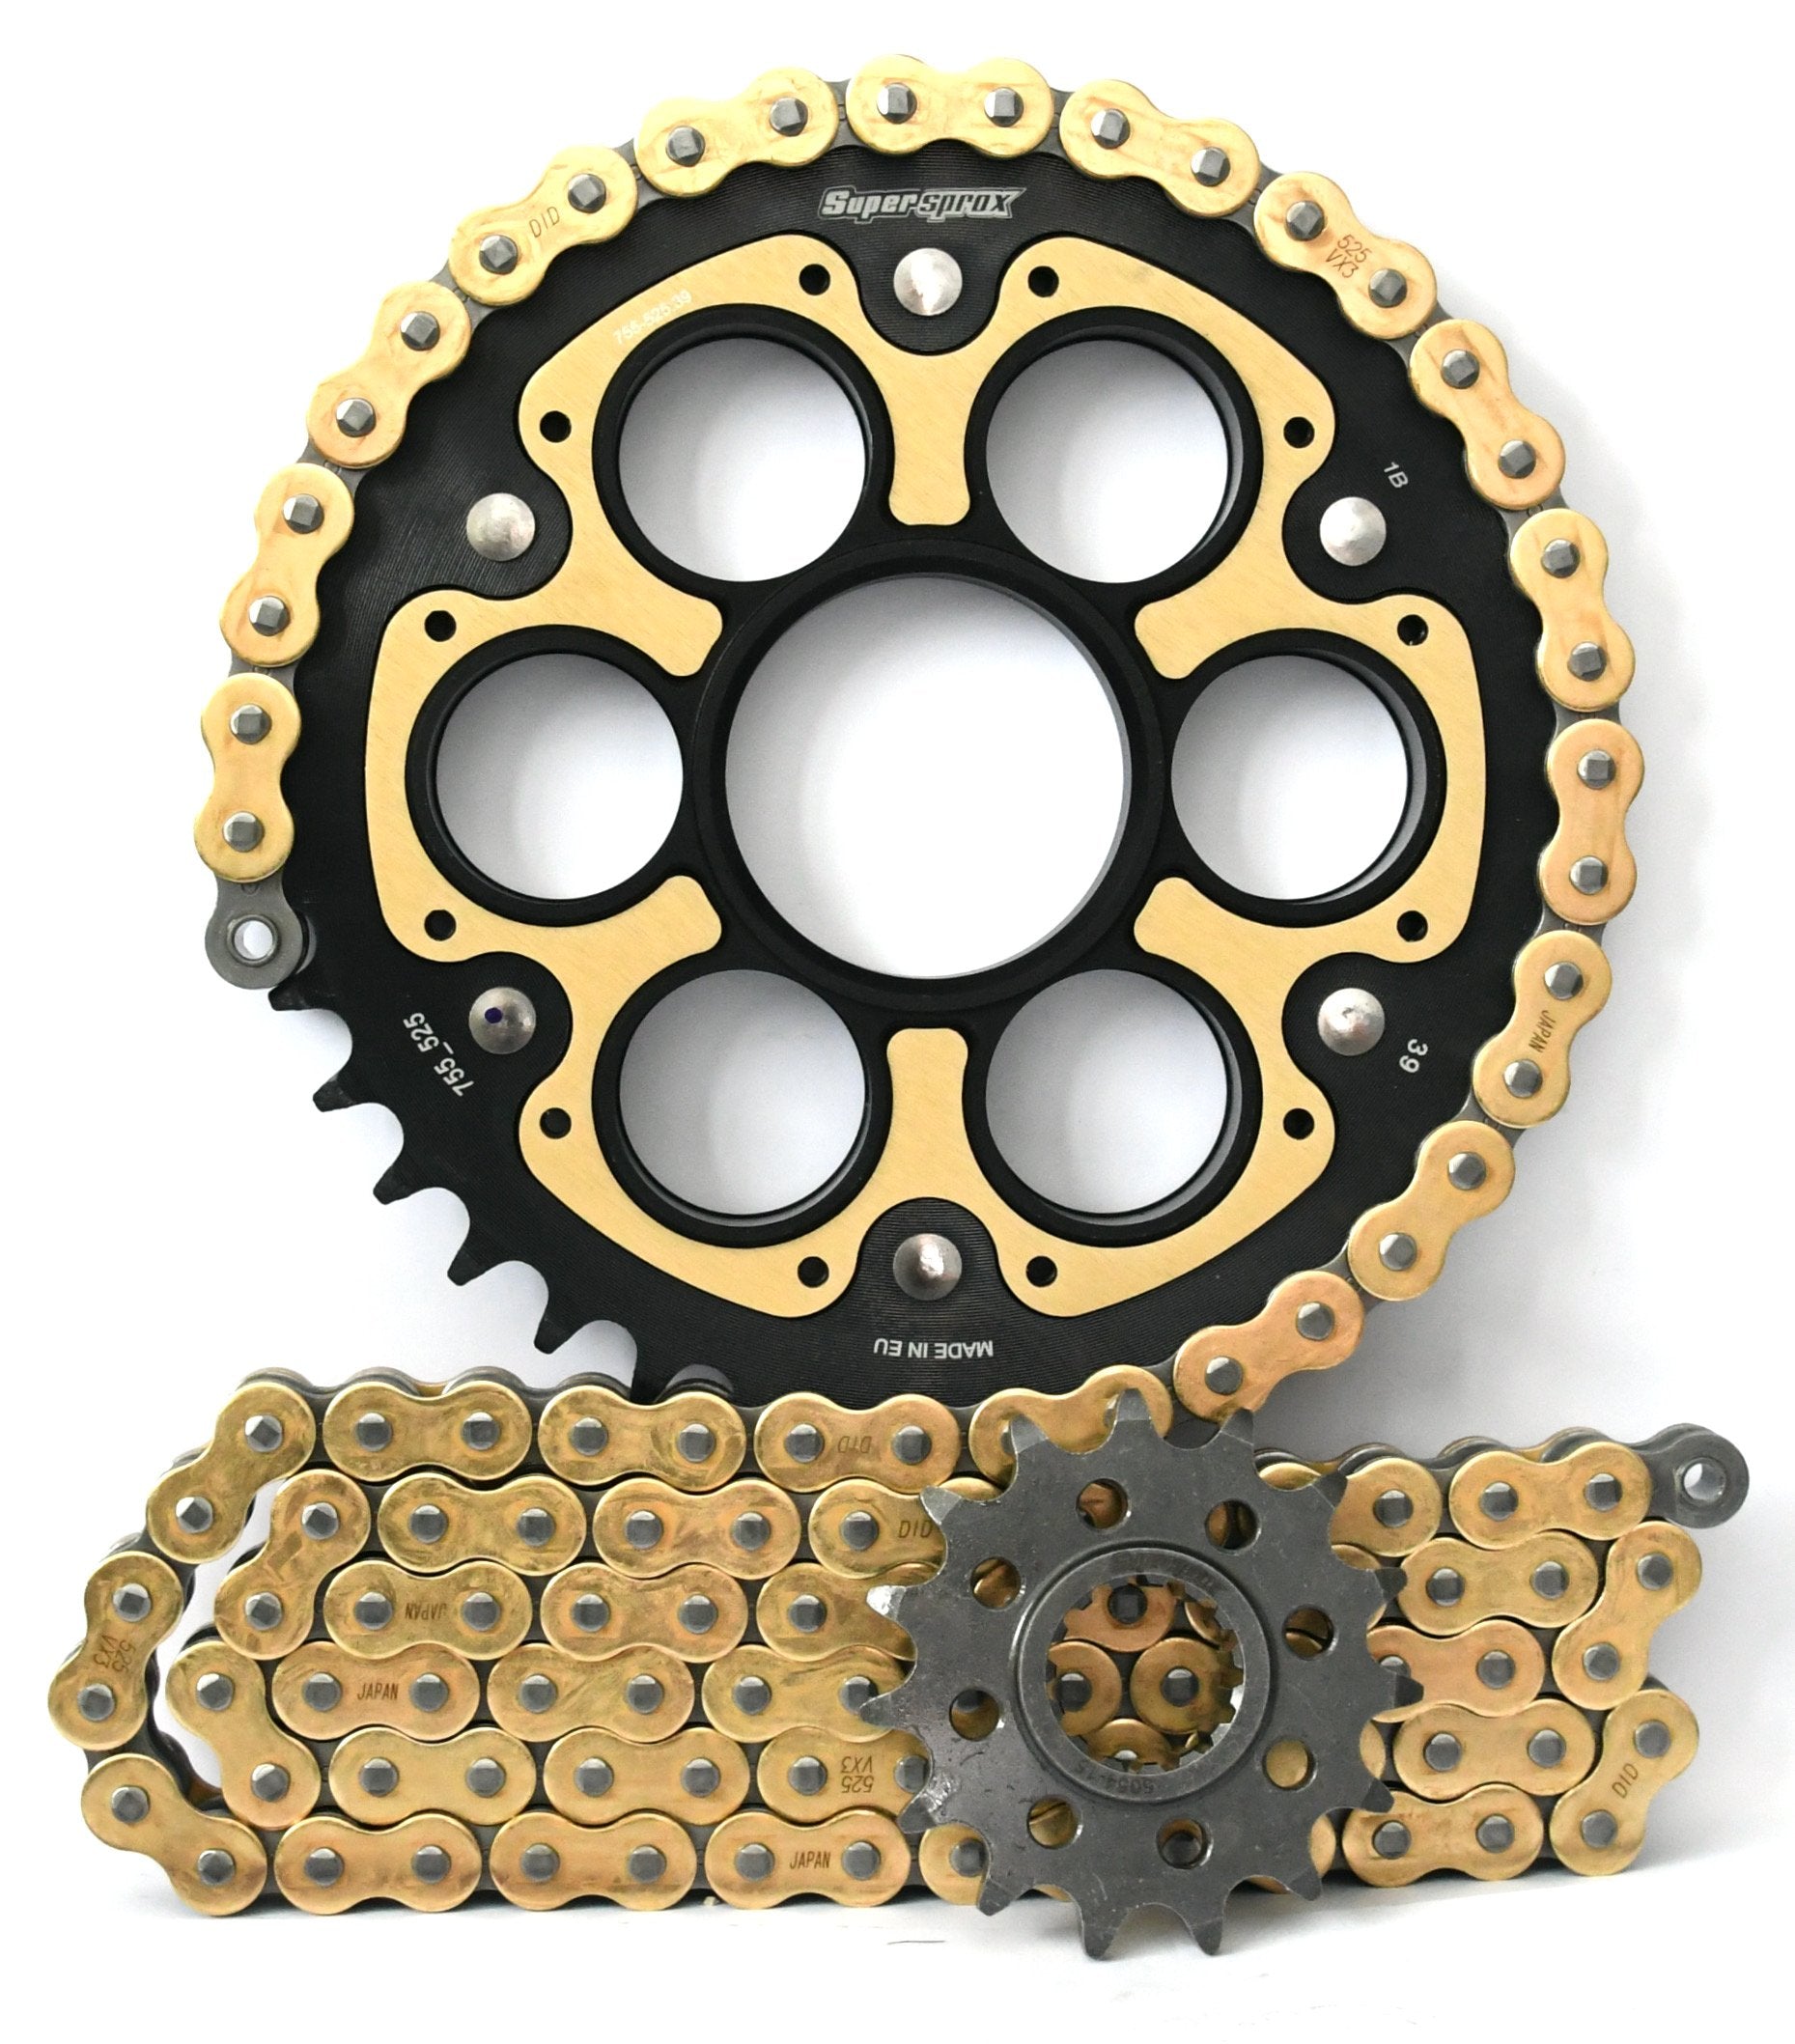 Supersprox Chain & Sprocket Kit for Ducati 1098 and 1198 - Standard Gearing - 0